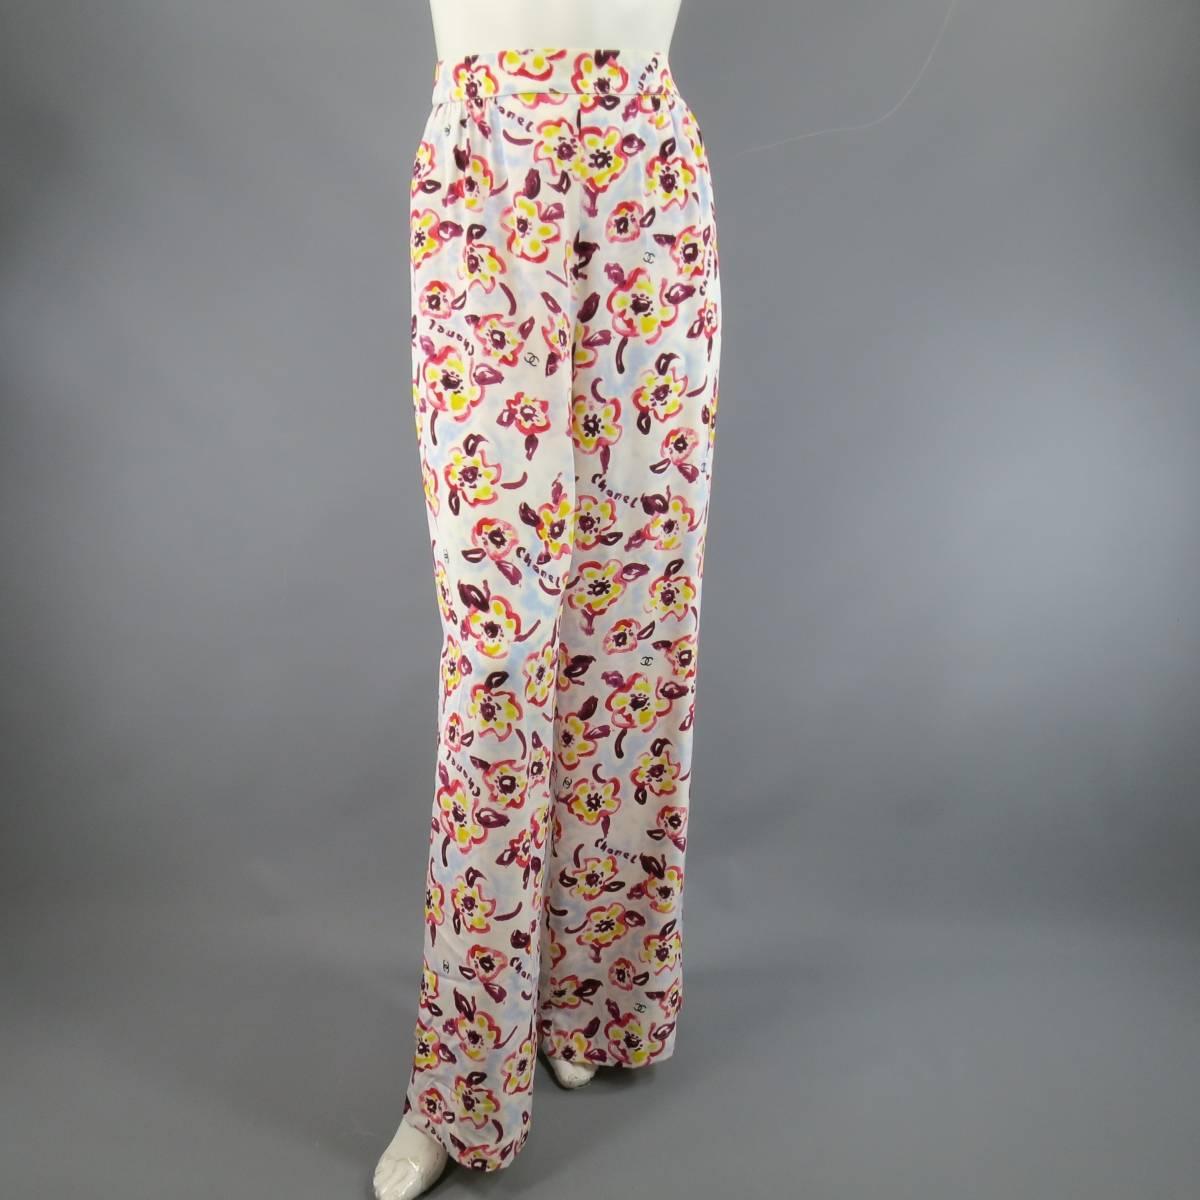 These fun CHANEL 1996 Cruise Collection trousers come in a light weight, flowy cream silk with all over sky blue, pink, yellow, and purple watercolor floral CC print and feature a high rise, gathered pleats, and wide legs. Some marks on back shown